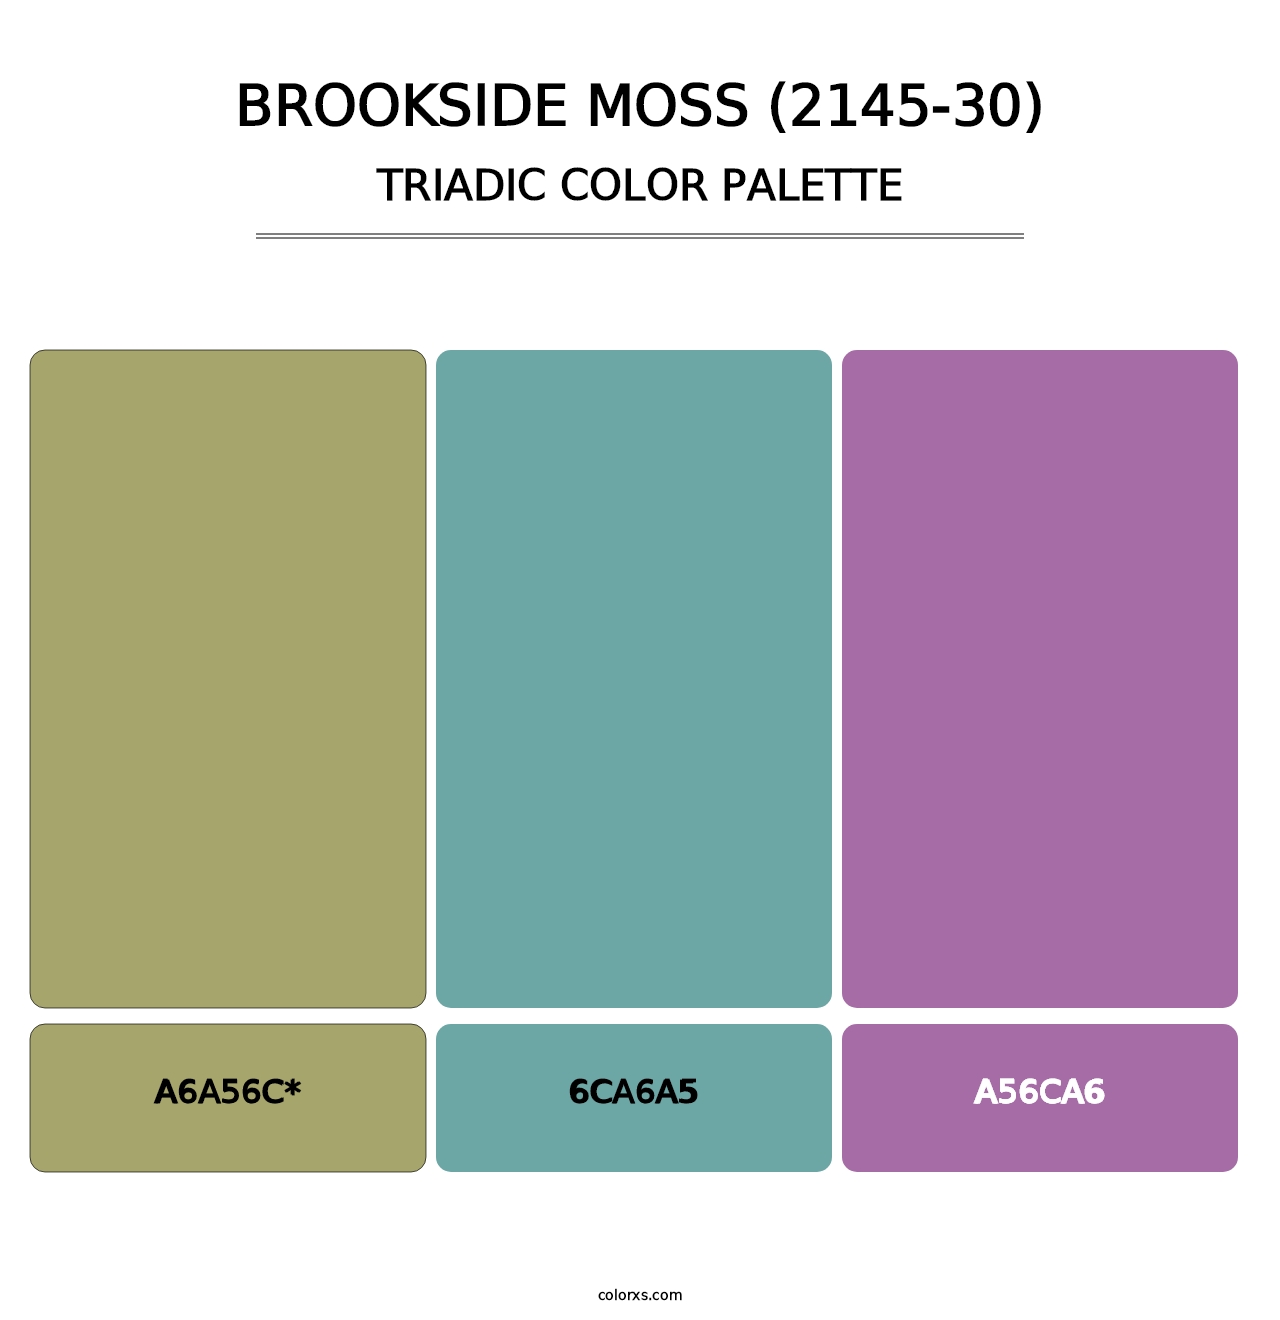 Brookside Moss (2145-30) - Triadic Color Palette